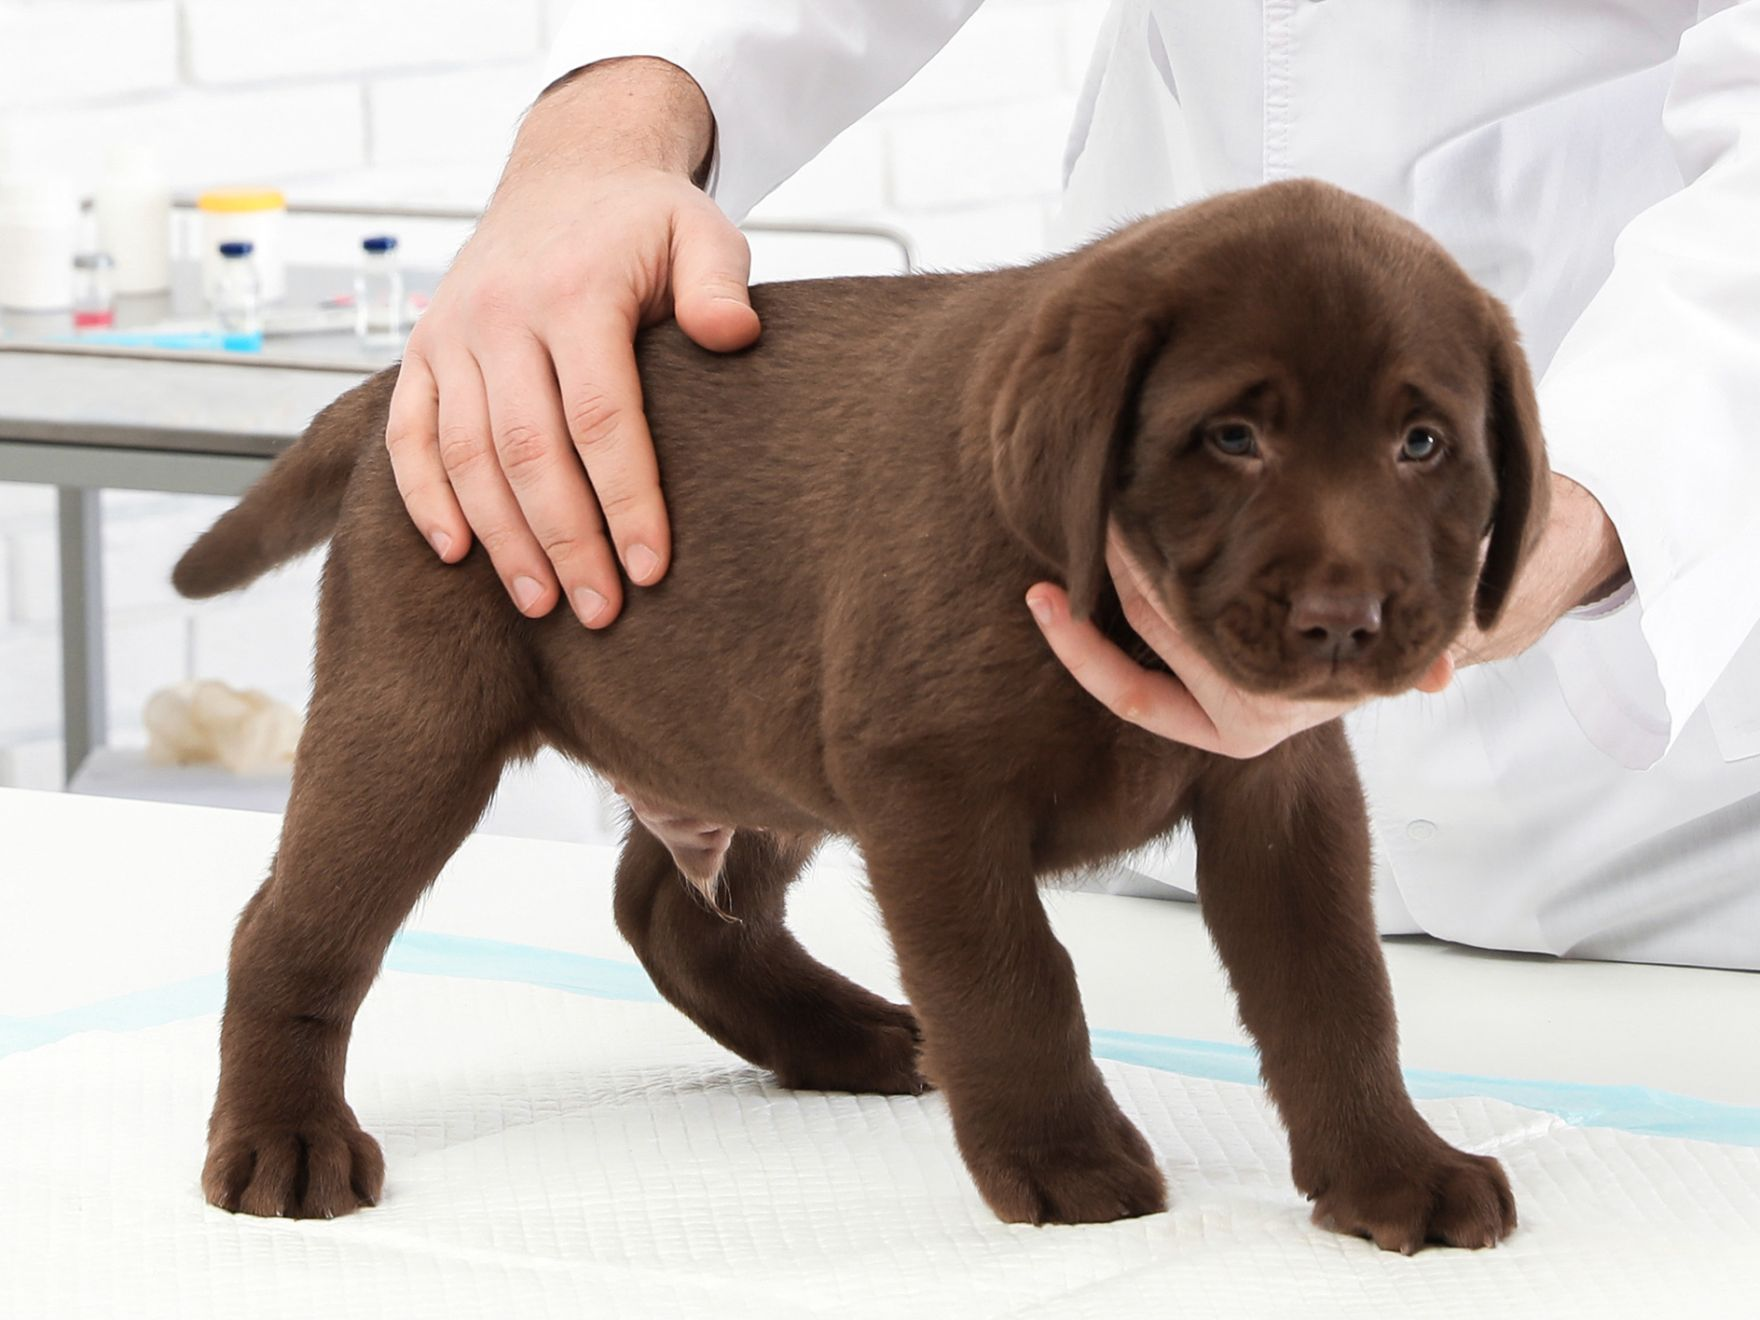 Chocolate Labrador Retriever puppy standing on an examination table being checked by a vet